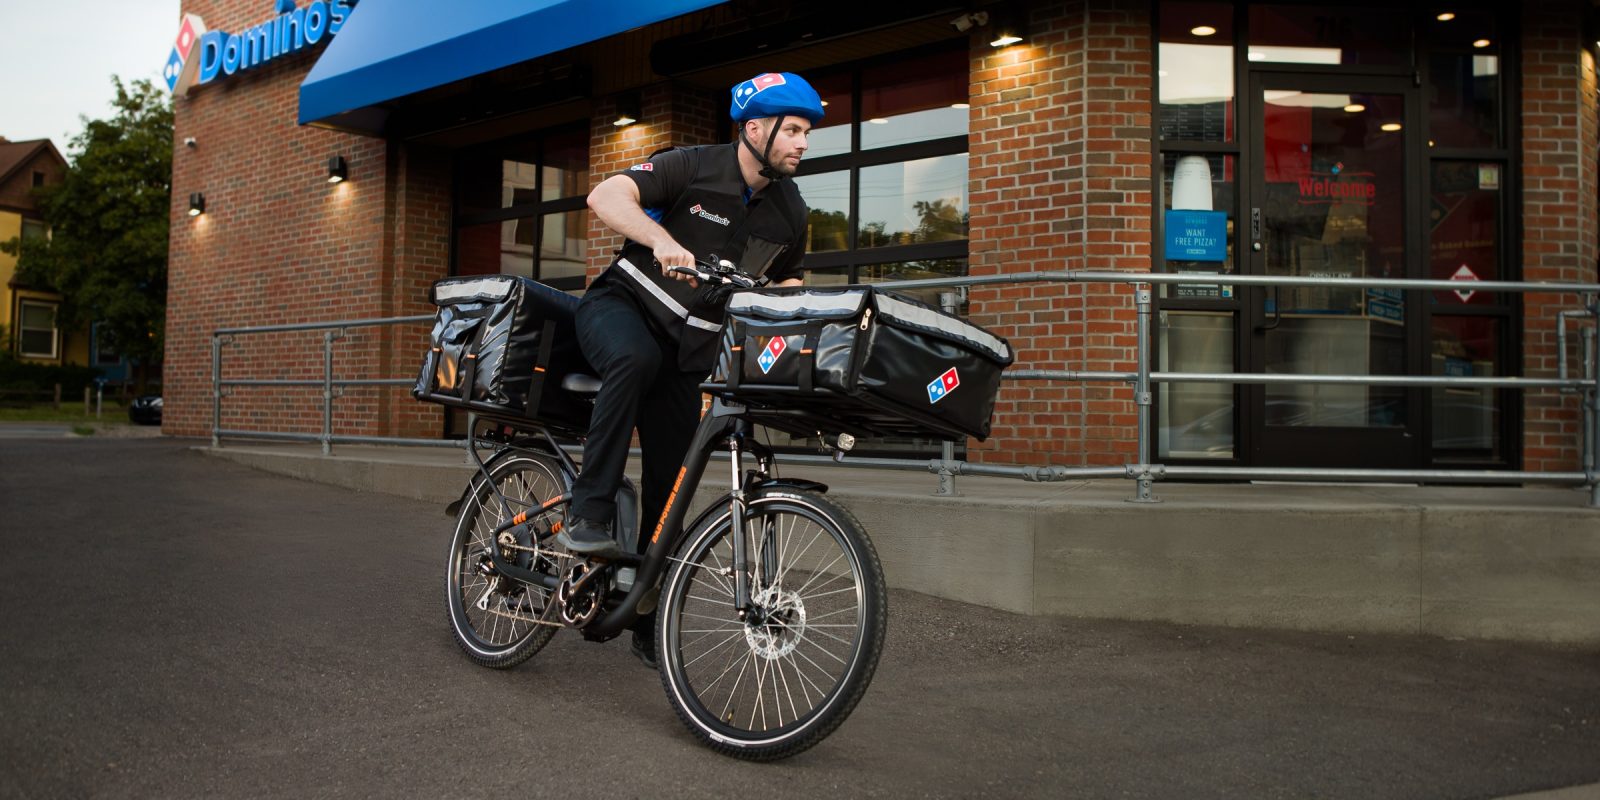 Delivery E Bikes To Serve Up Hot Pizza From Domino S Nationwide